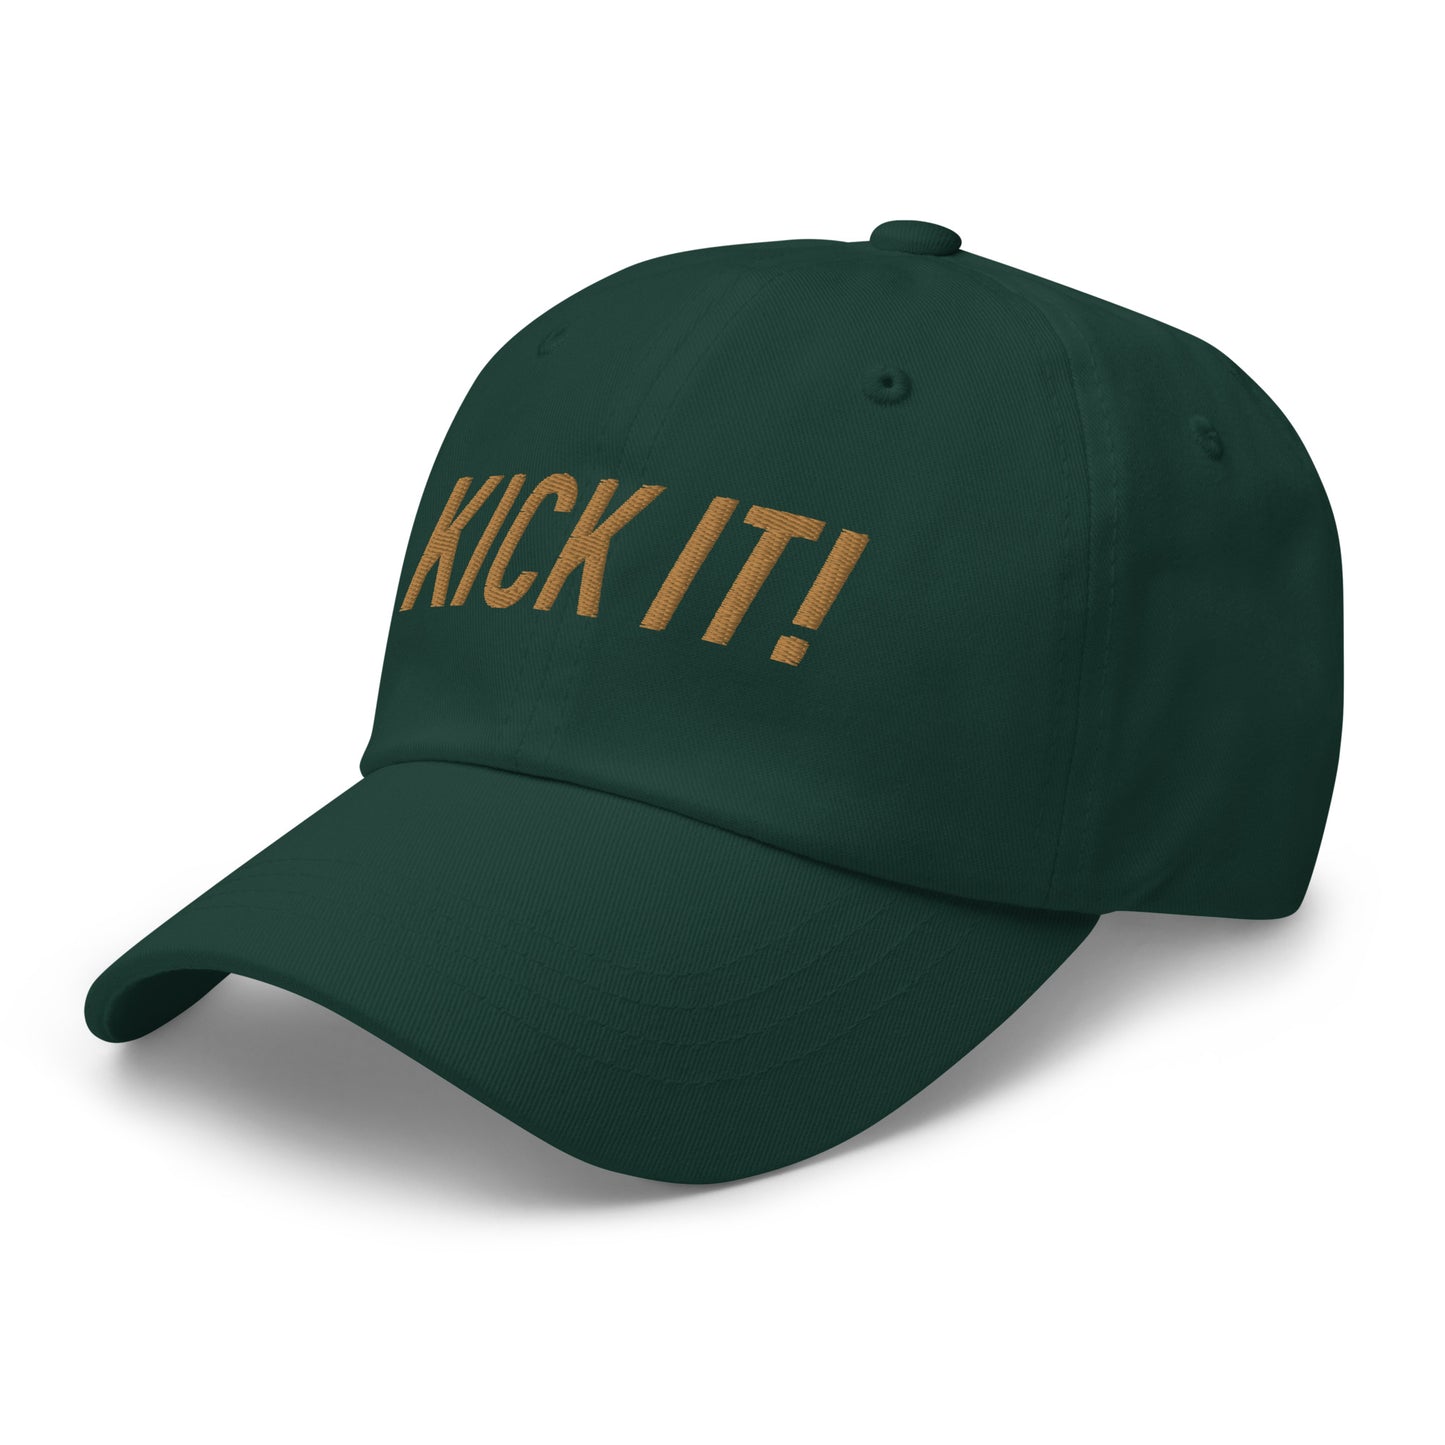 Kick It! Dad hat - Old Gold letters